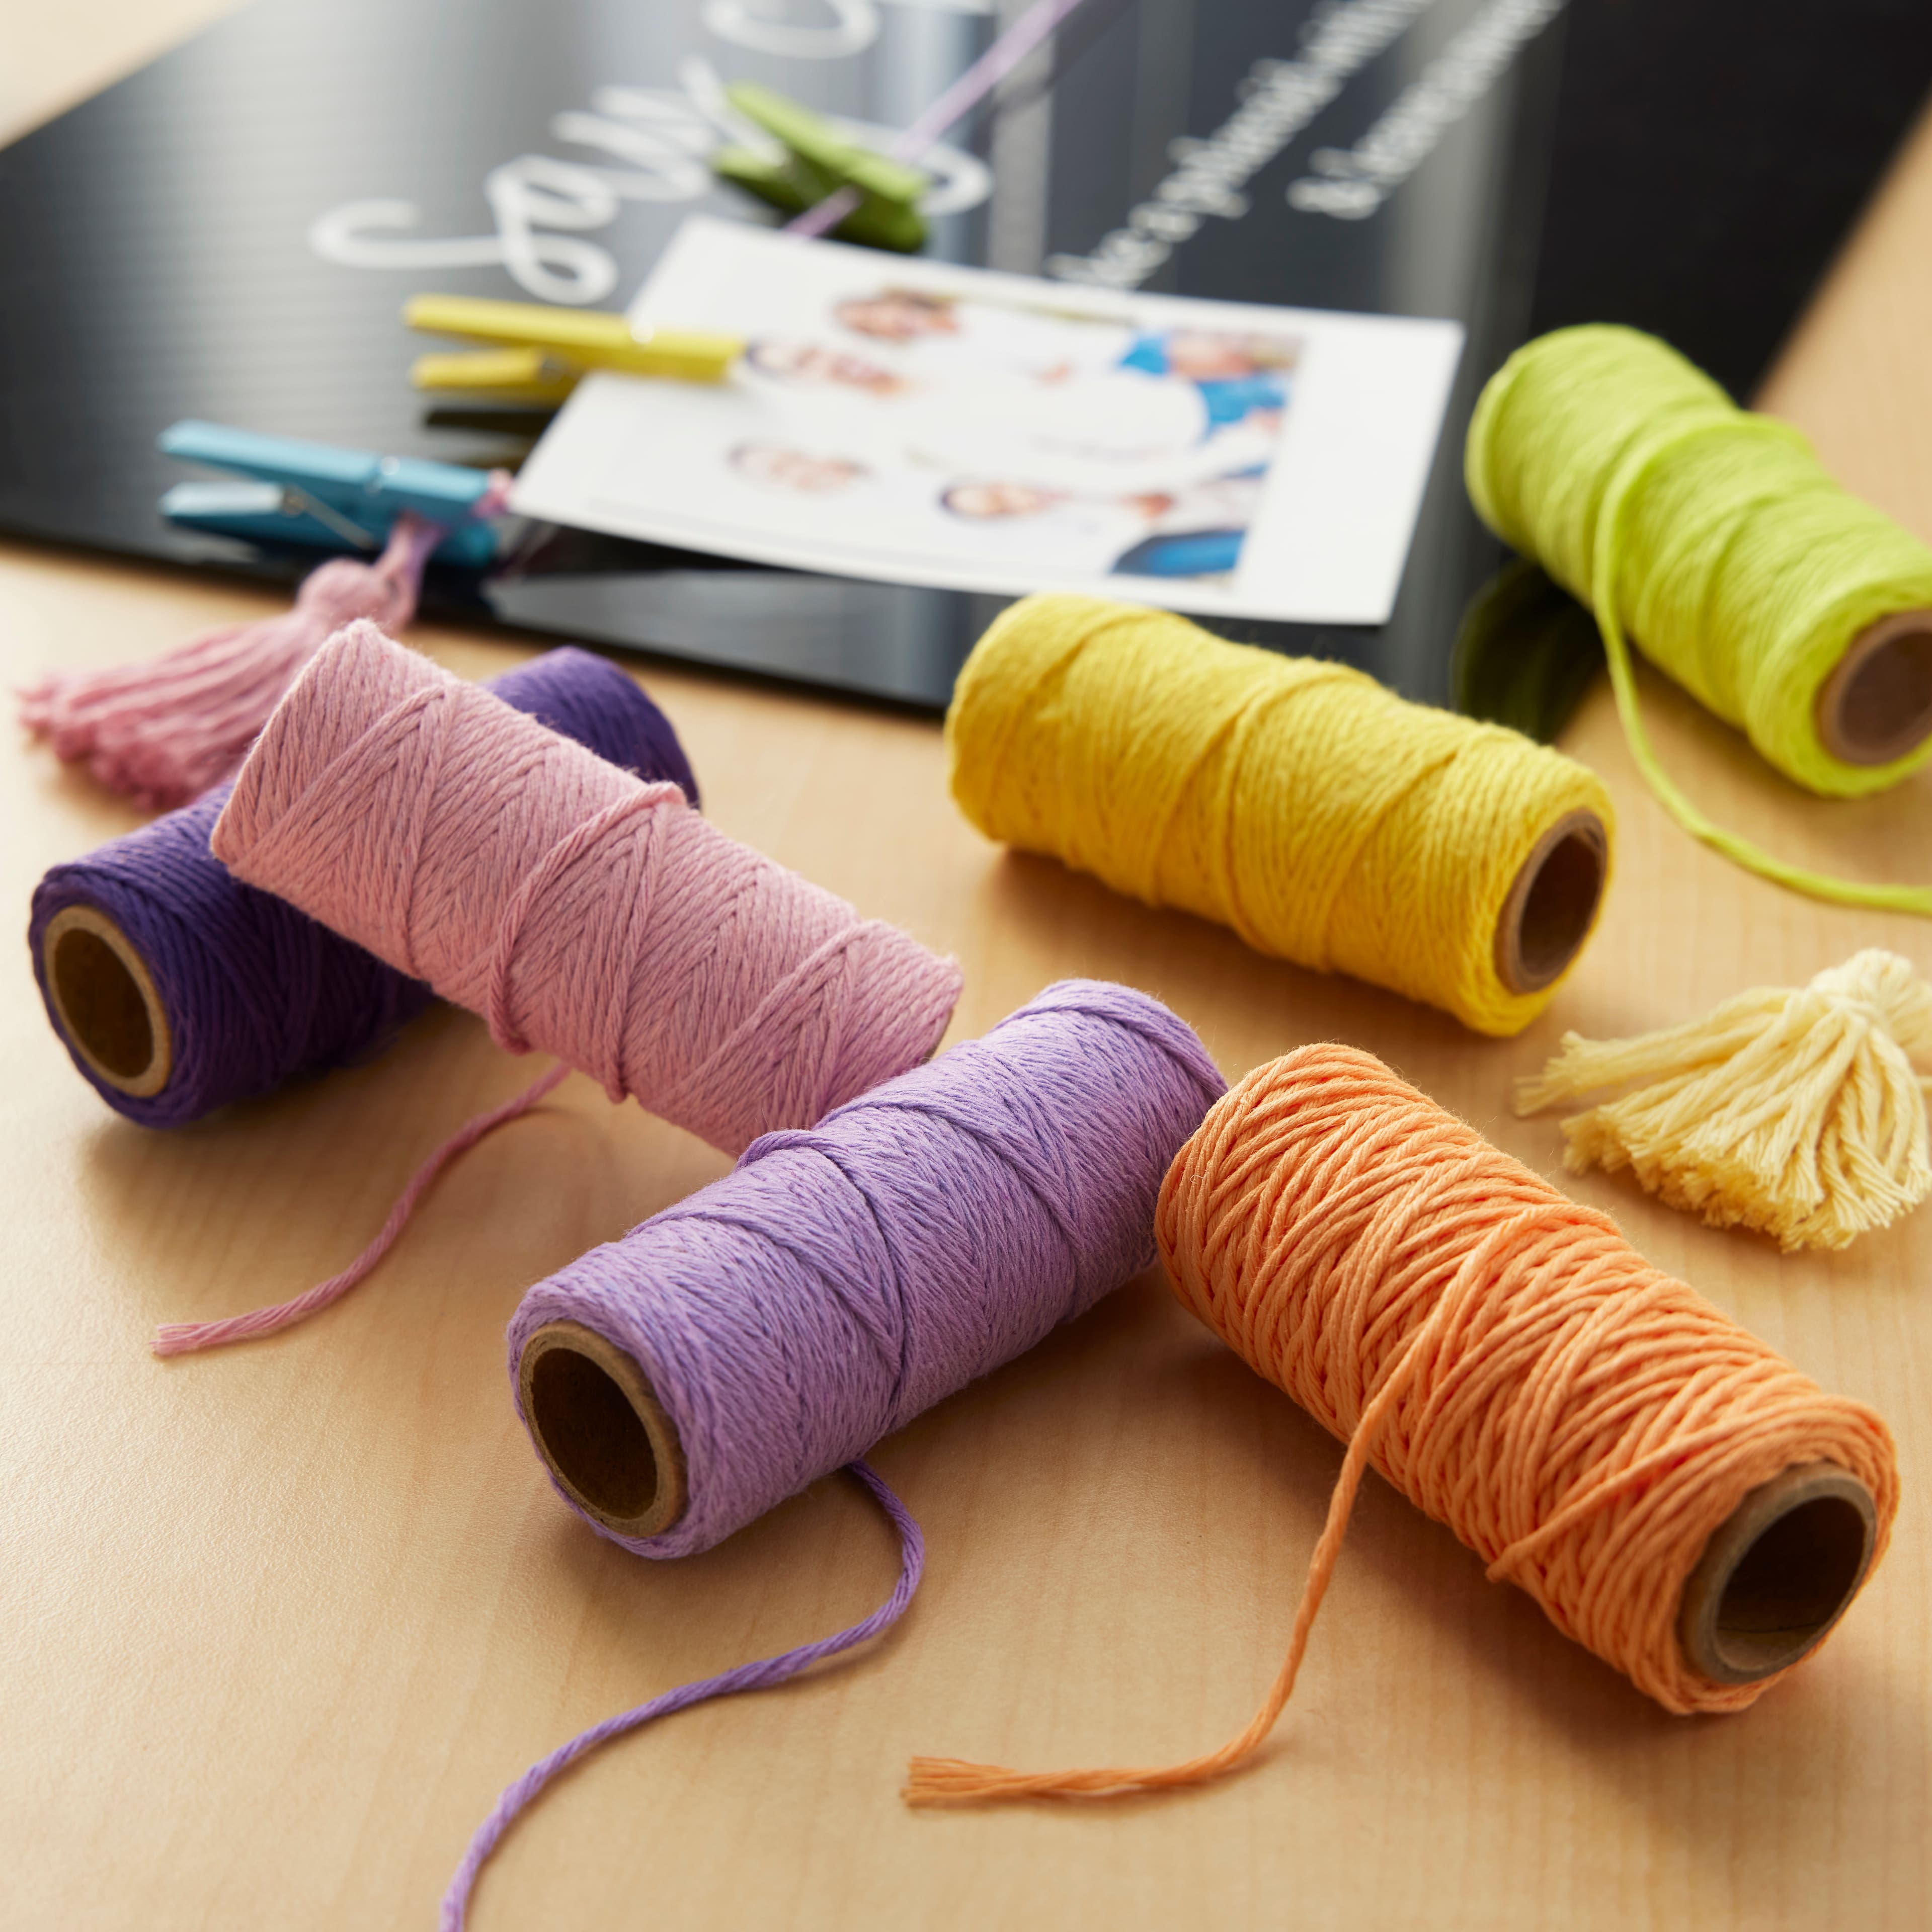 Rainbow Jute Value Pack by Recollections&#x2122;